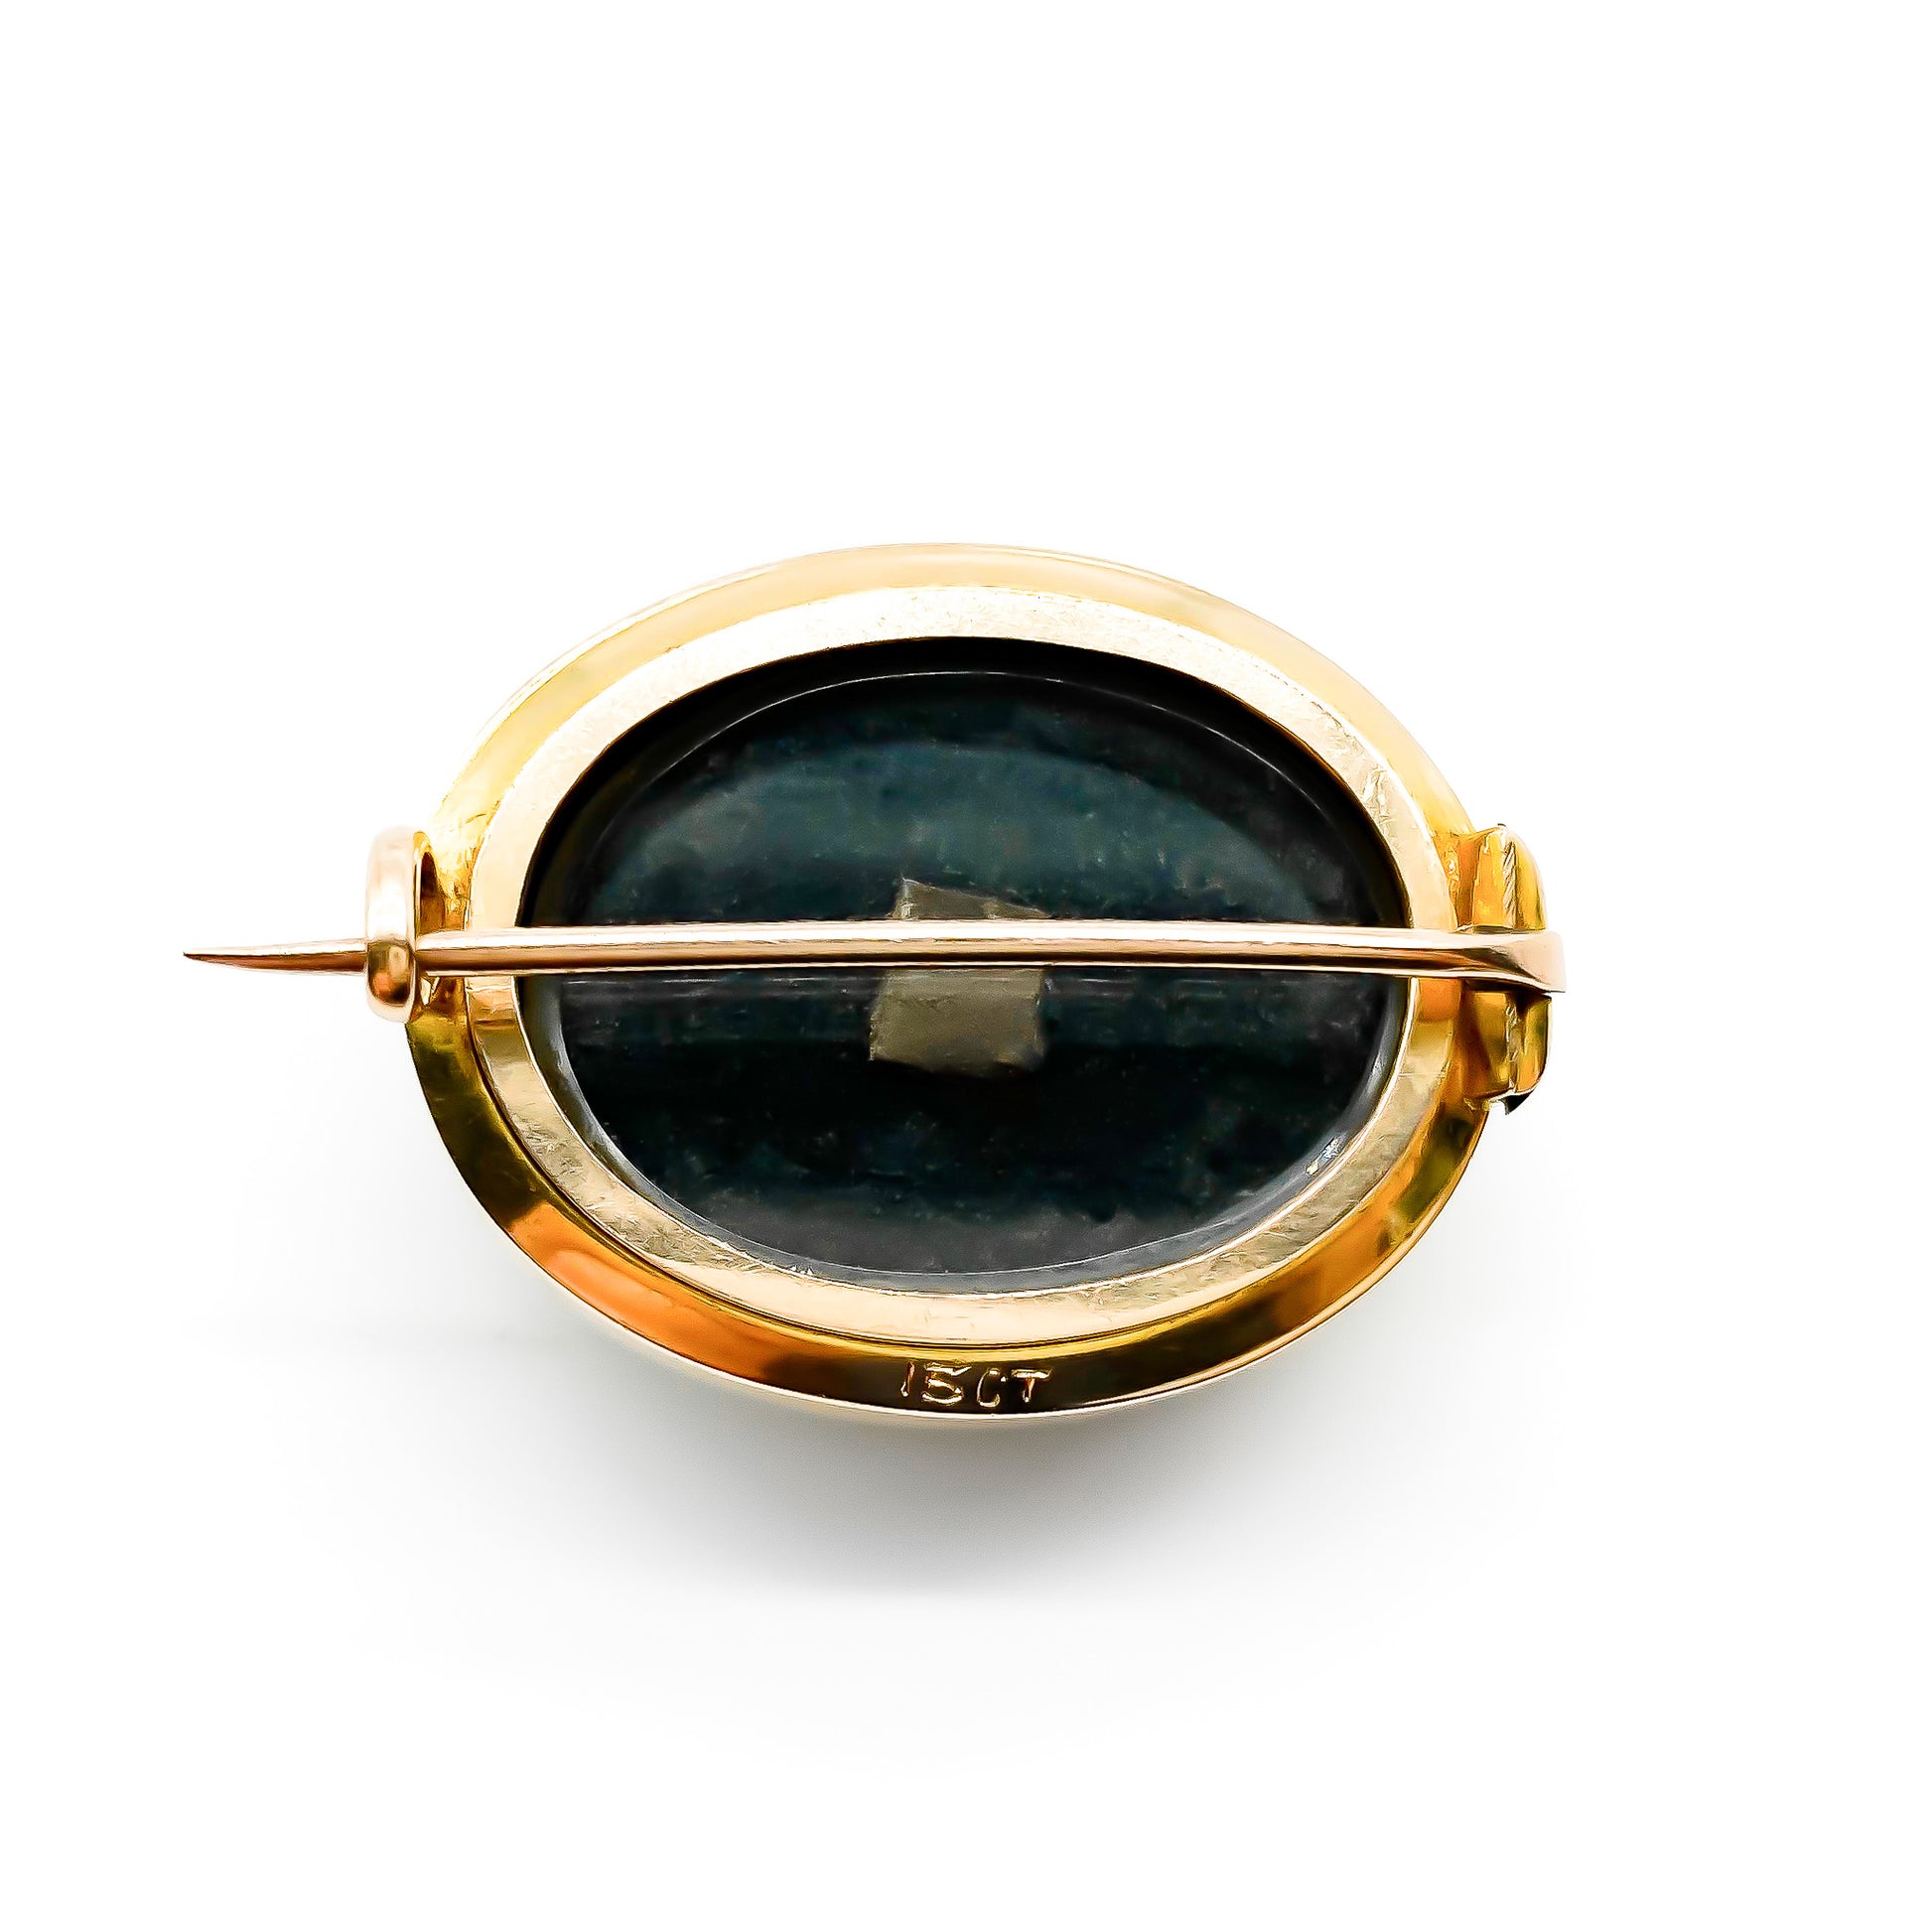 Charming 15ct rose gold mourning brooch set with an oval onyx cabochon with a seed pearl motif in centre. Brooch has a bevelled glass backing.